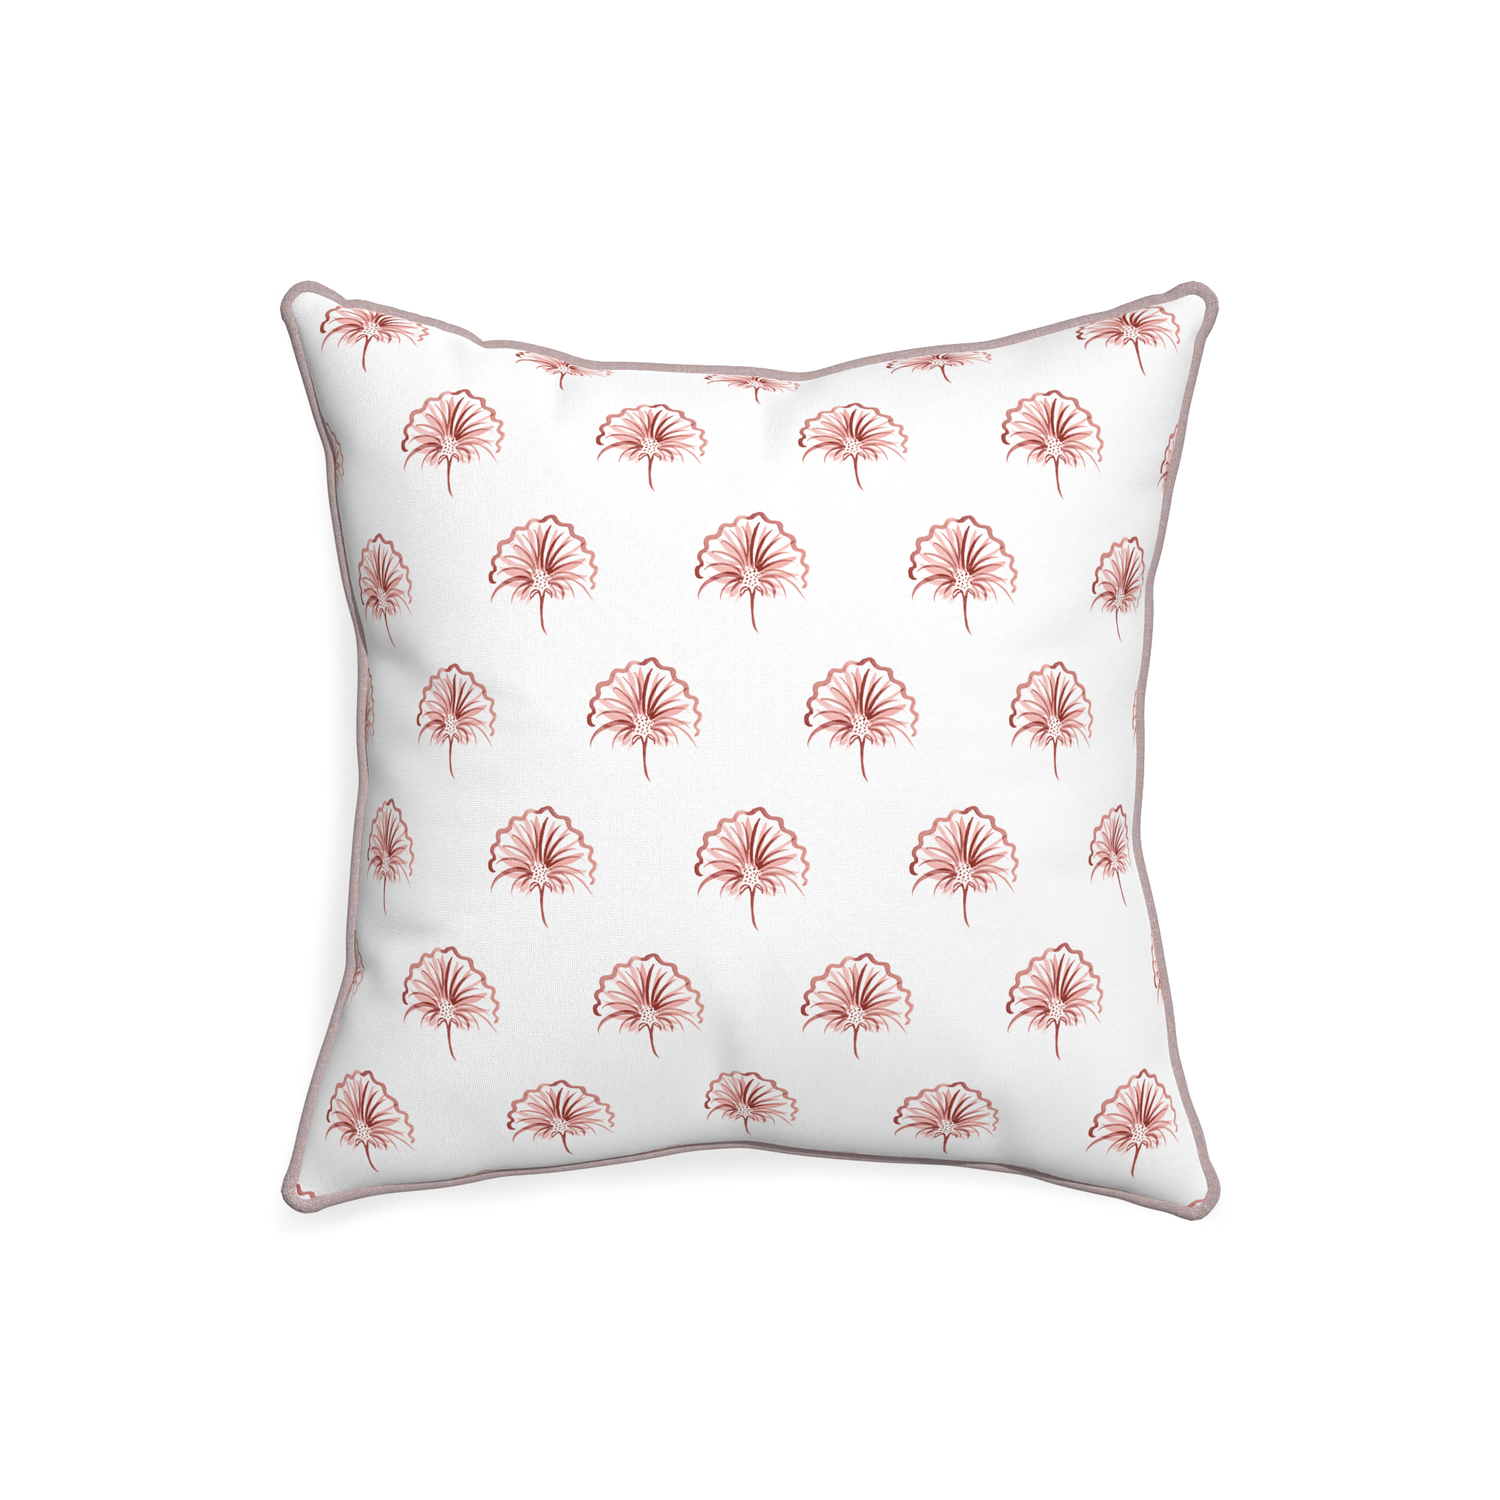 20-square penelope rose custom floral pinkpillow with orchid piping on white background